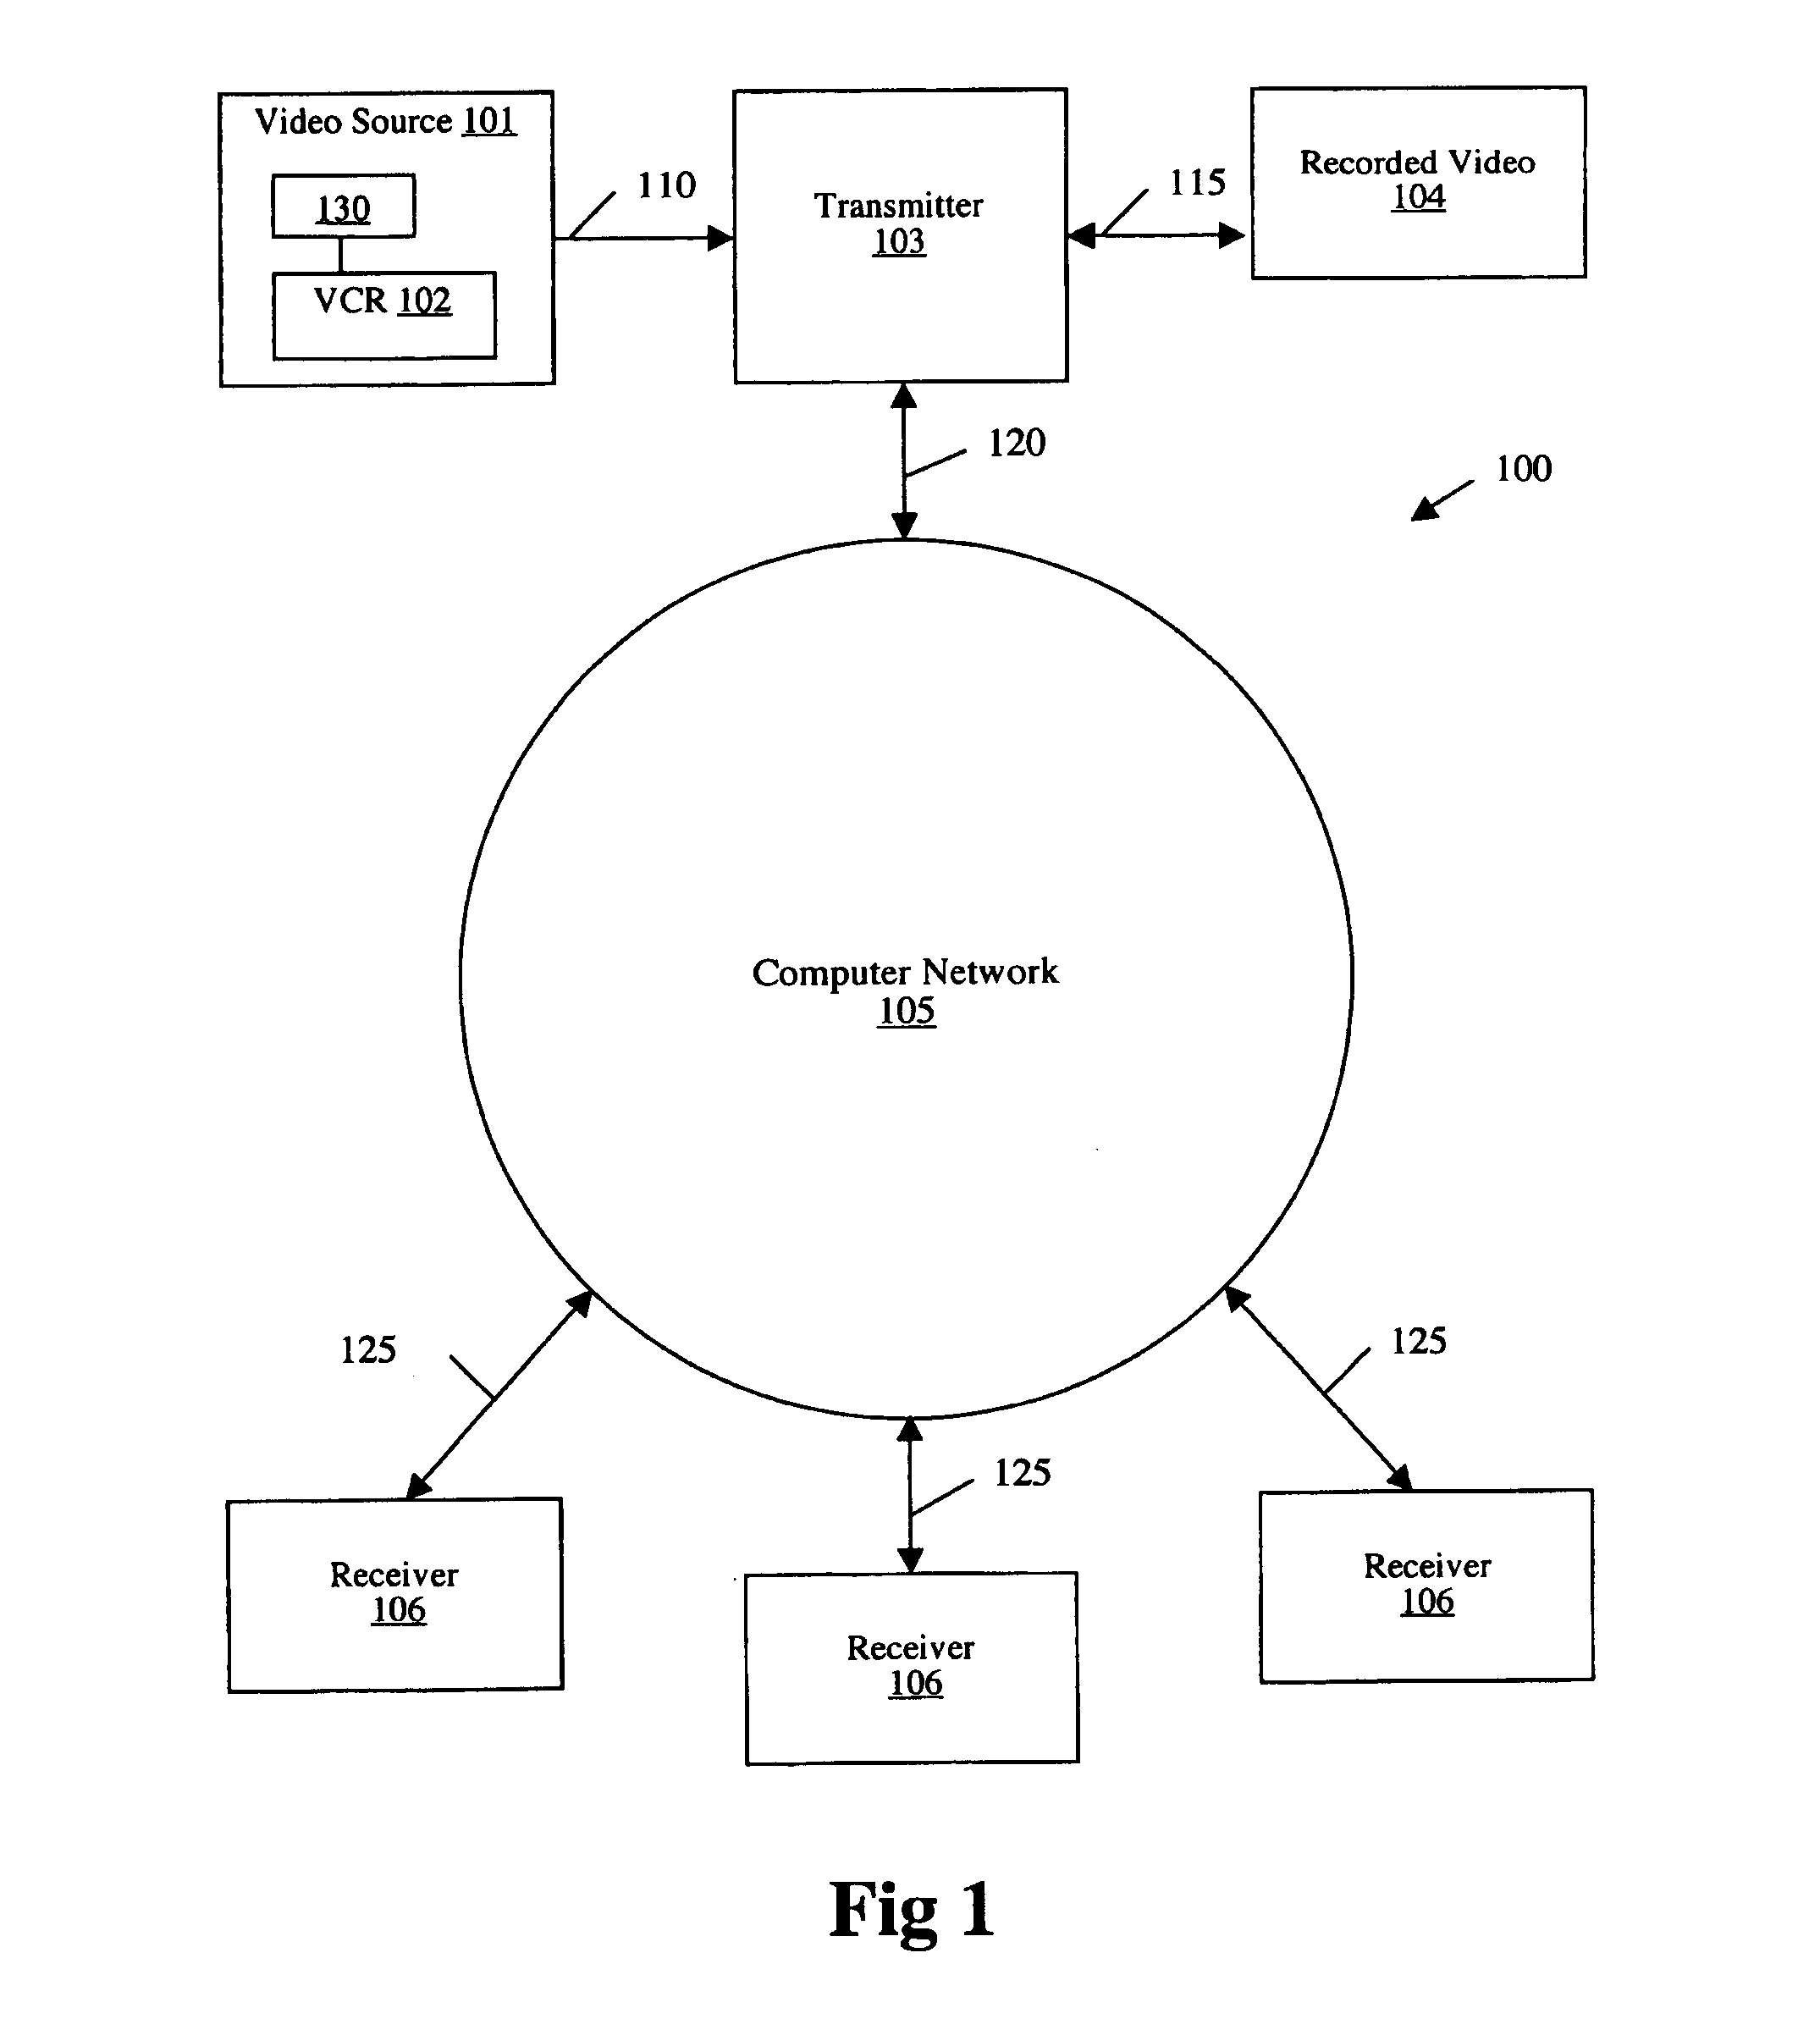 System for transmitting video images over a computer network to a remote receiver